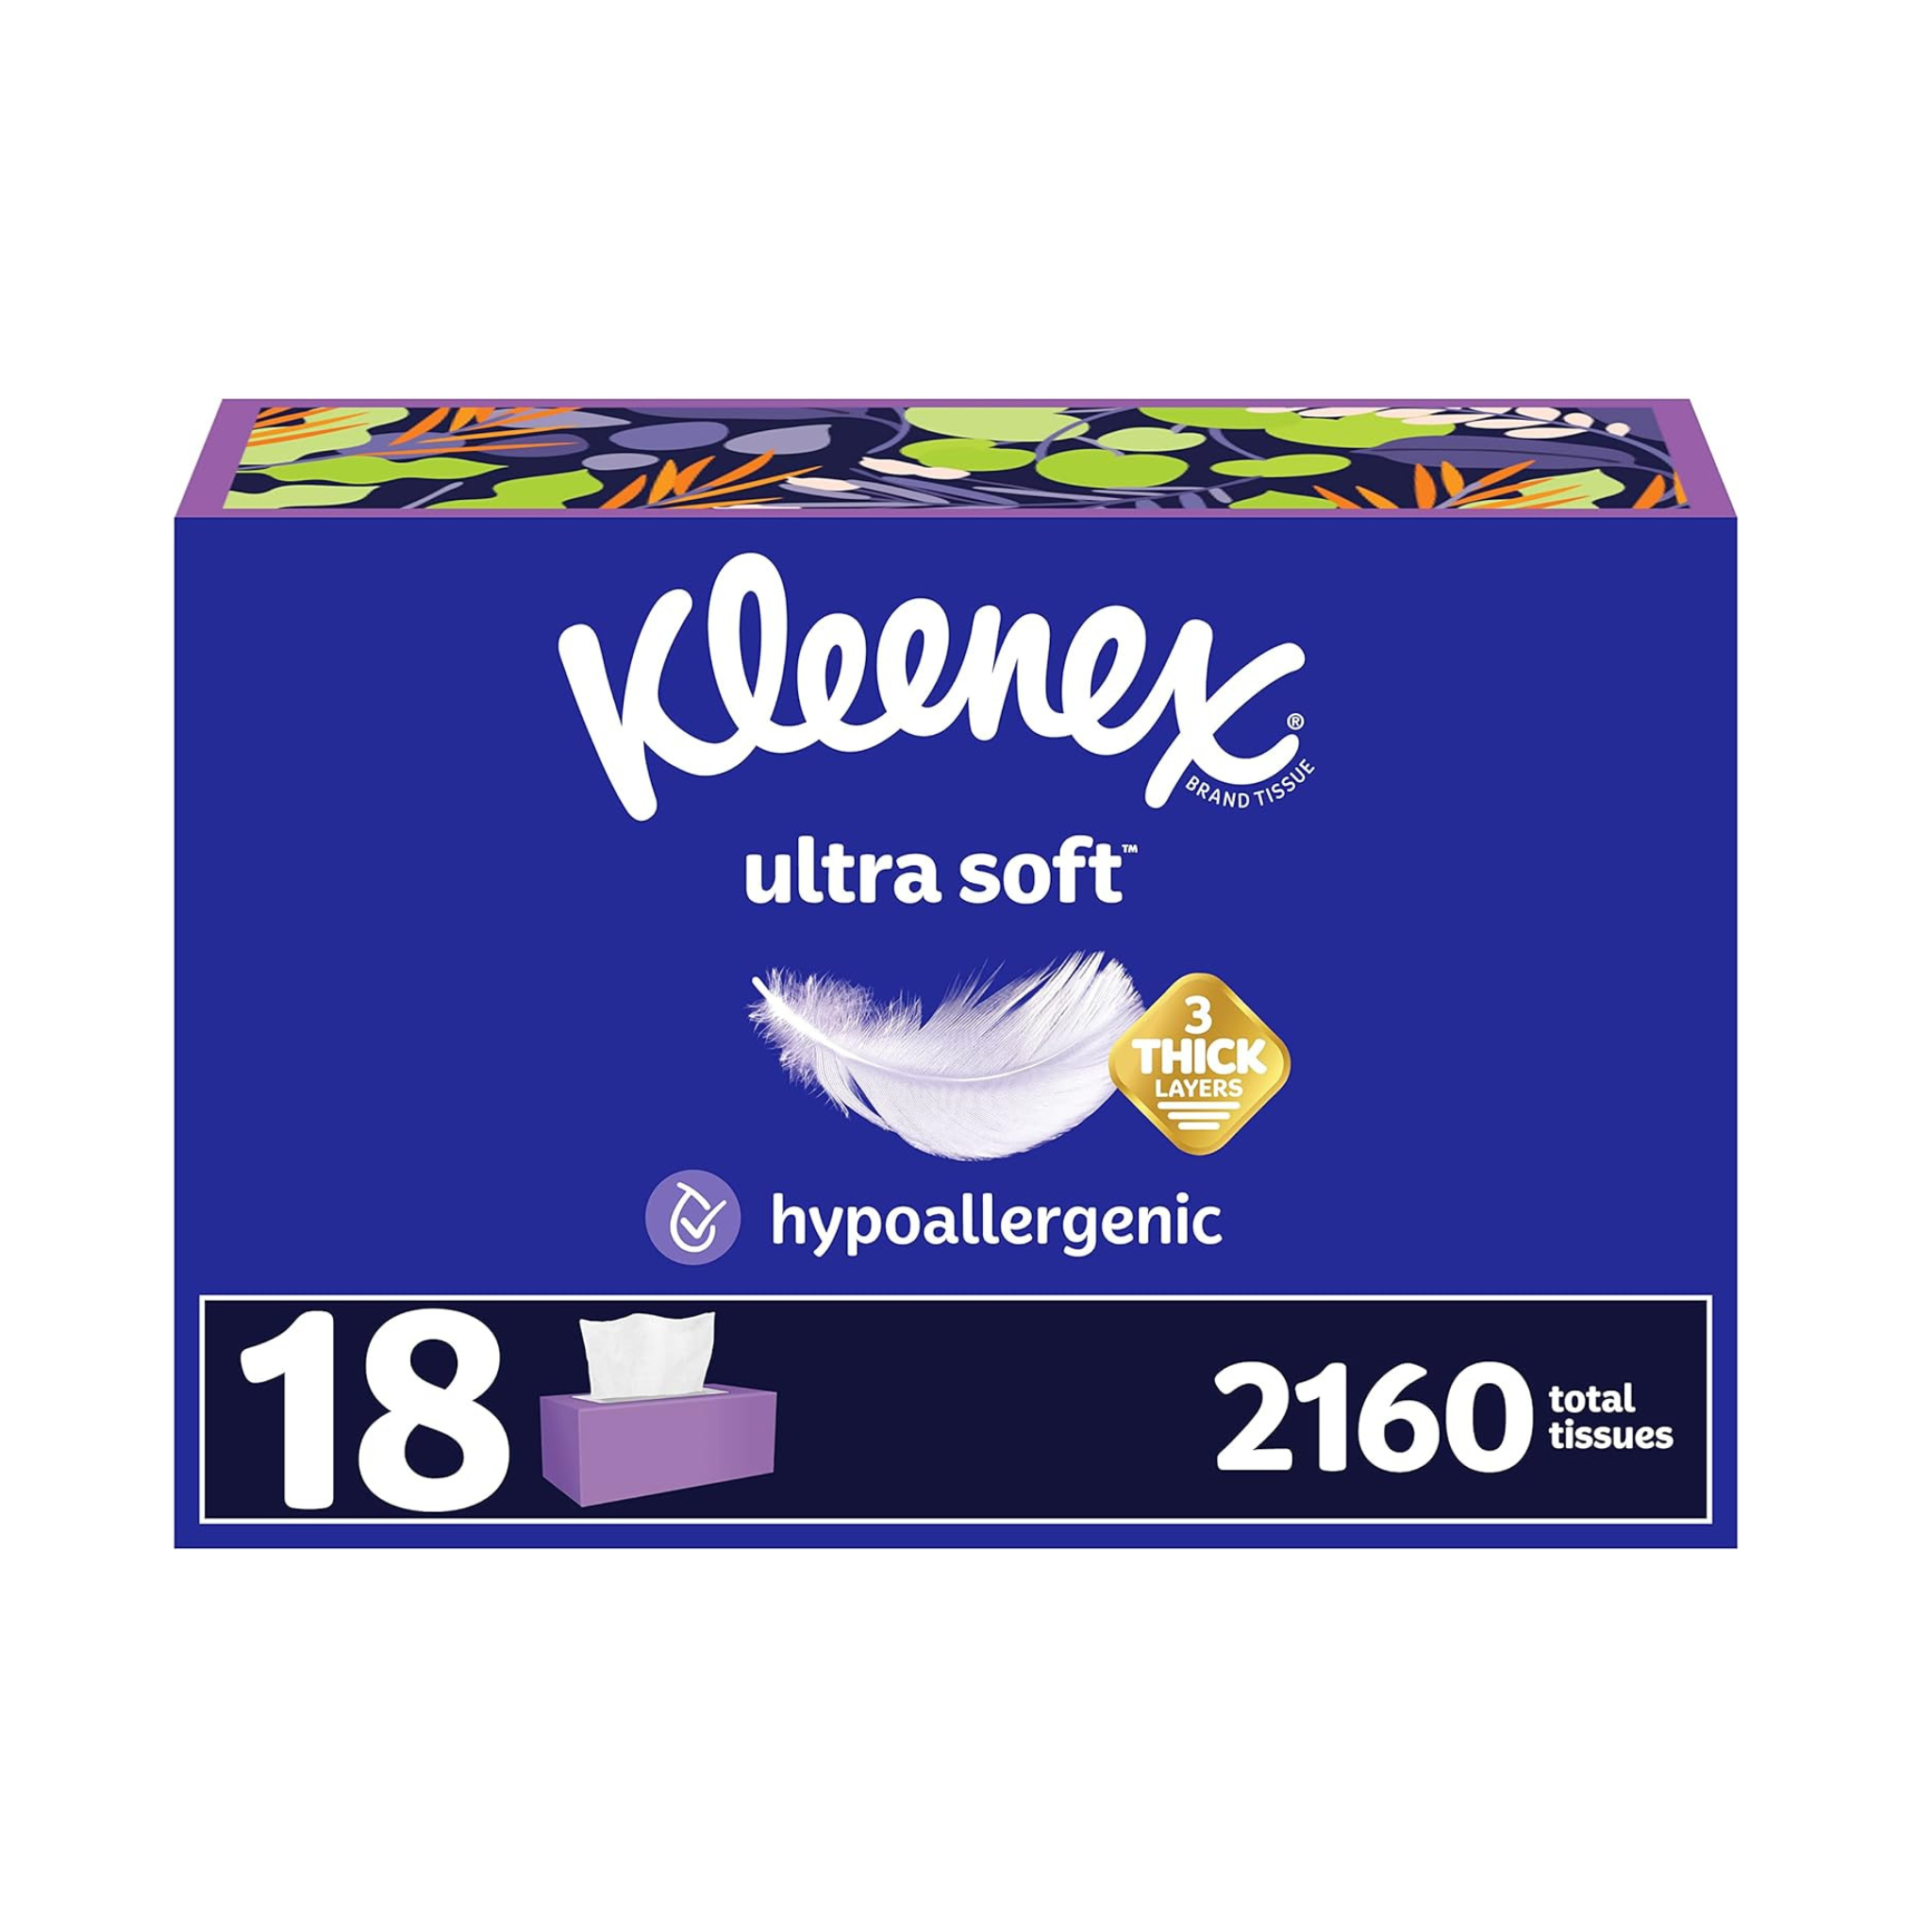 18 Boxes Of Kleenex Ultra Soft Facial Tissues